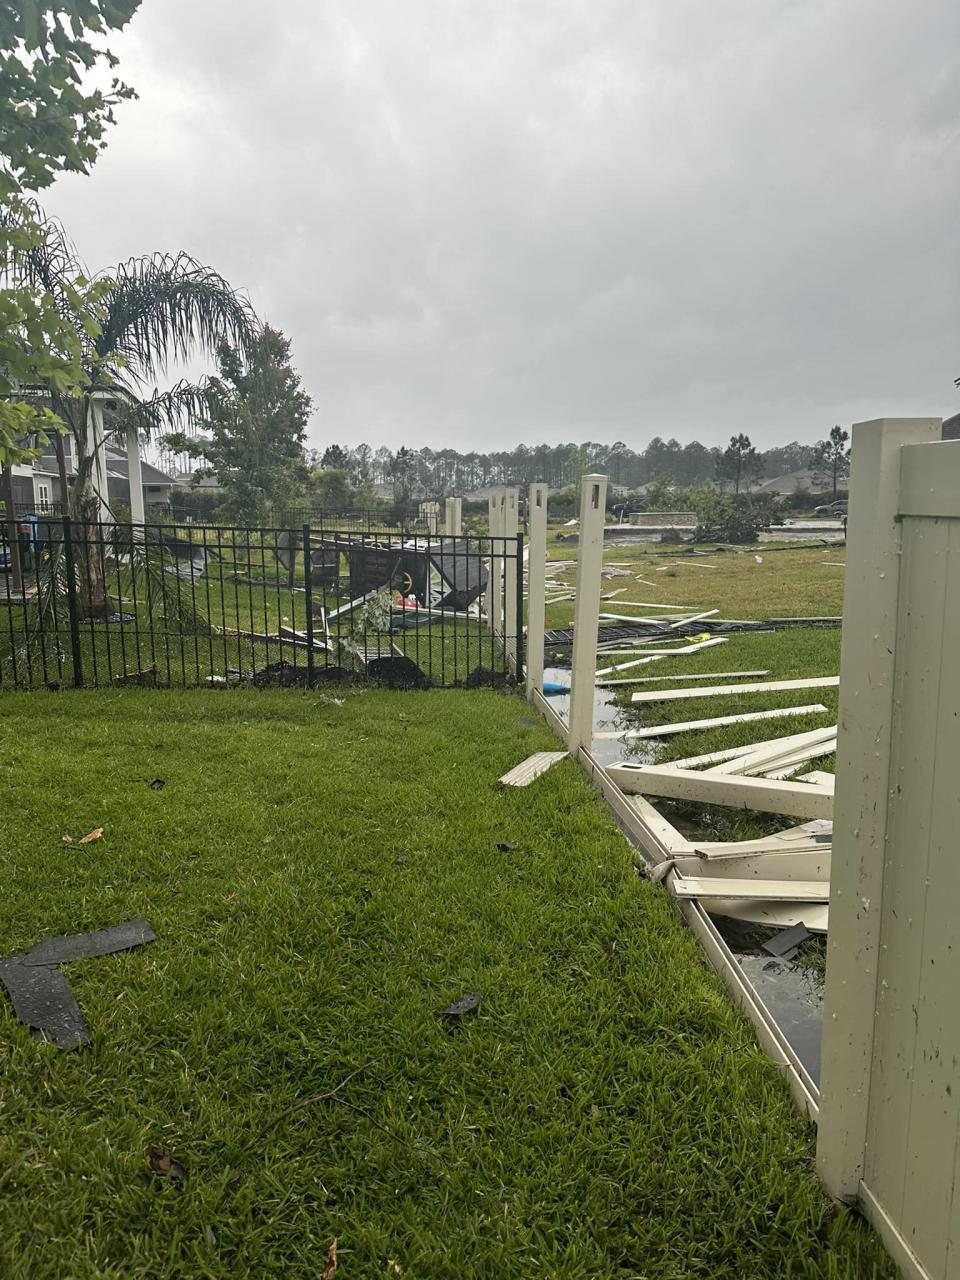 St. Johns County Fire Rescue shares tornado damage photos from World Golf Village area.